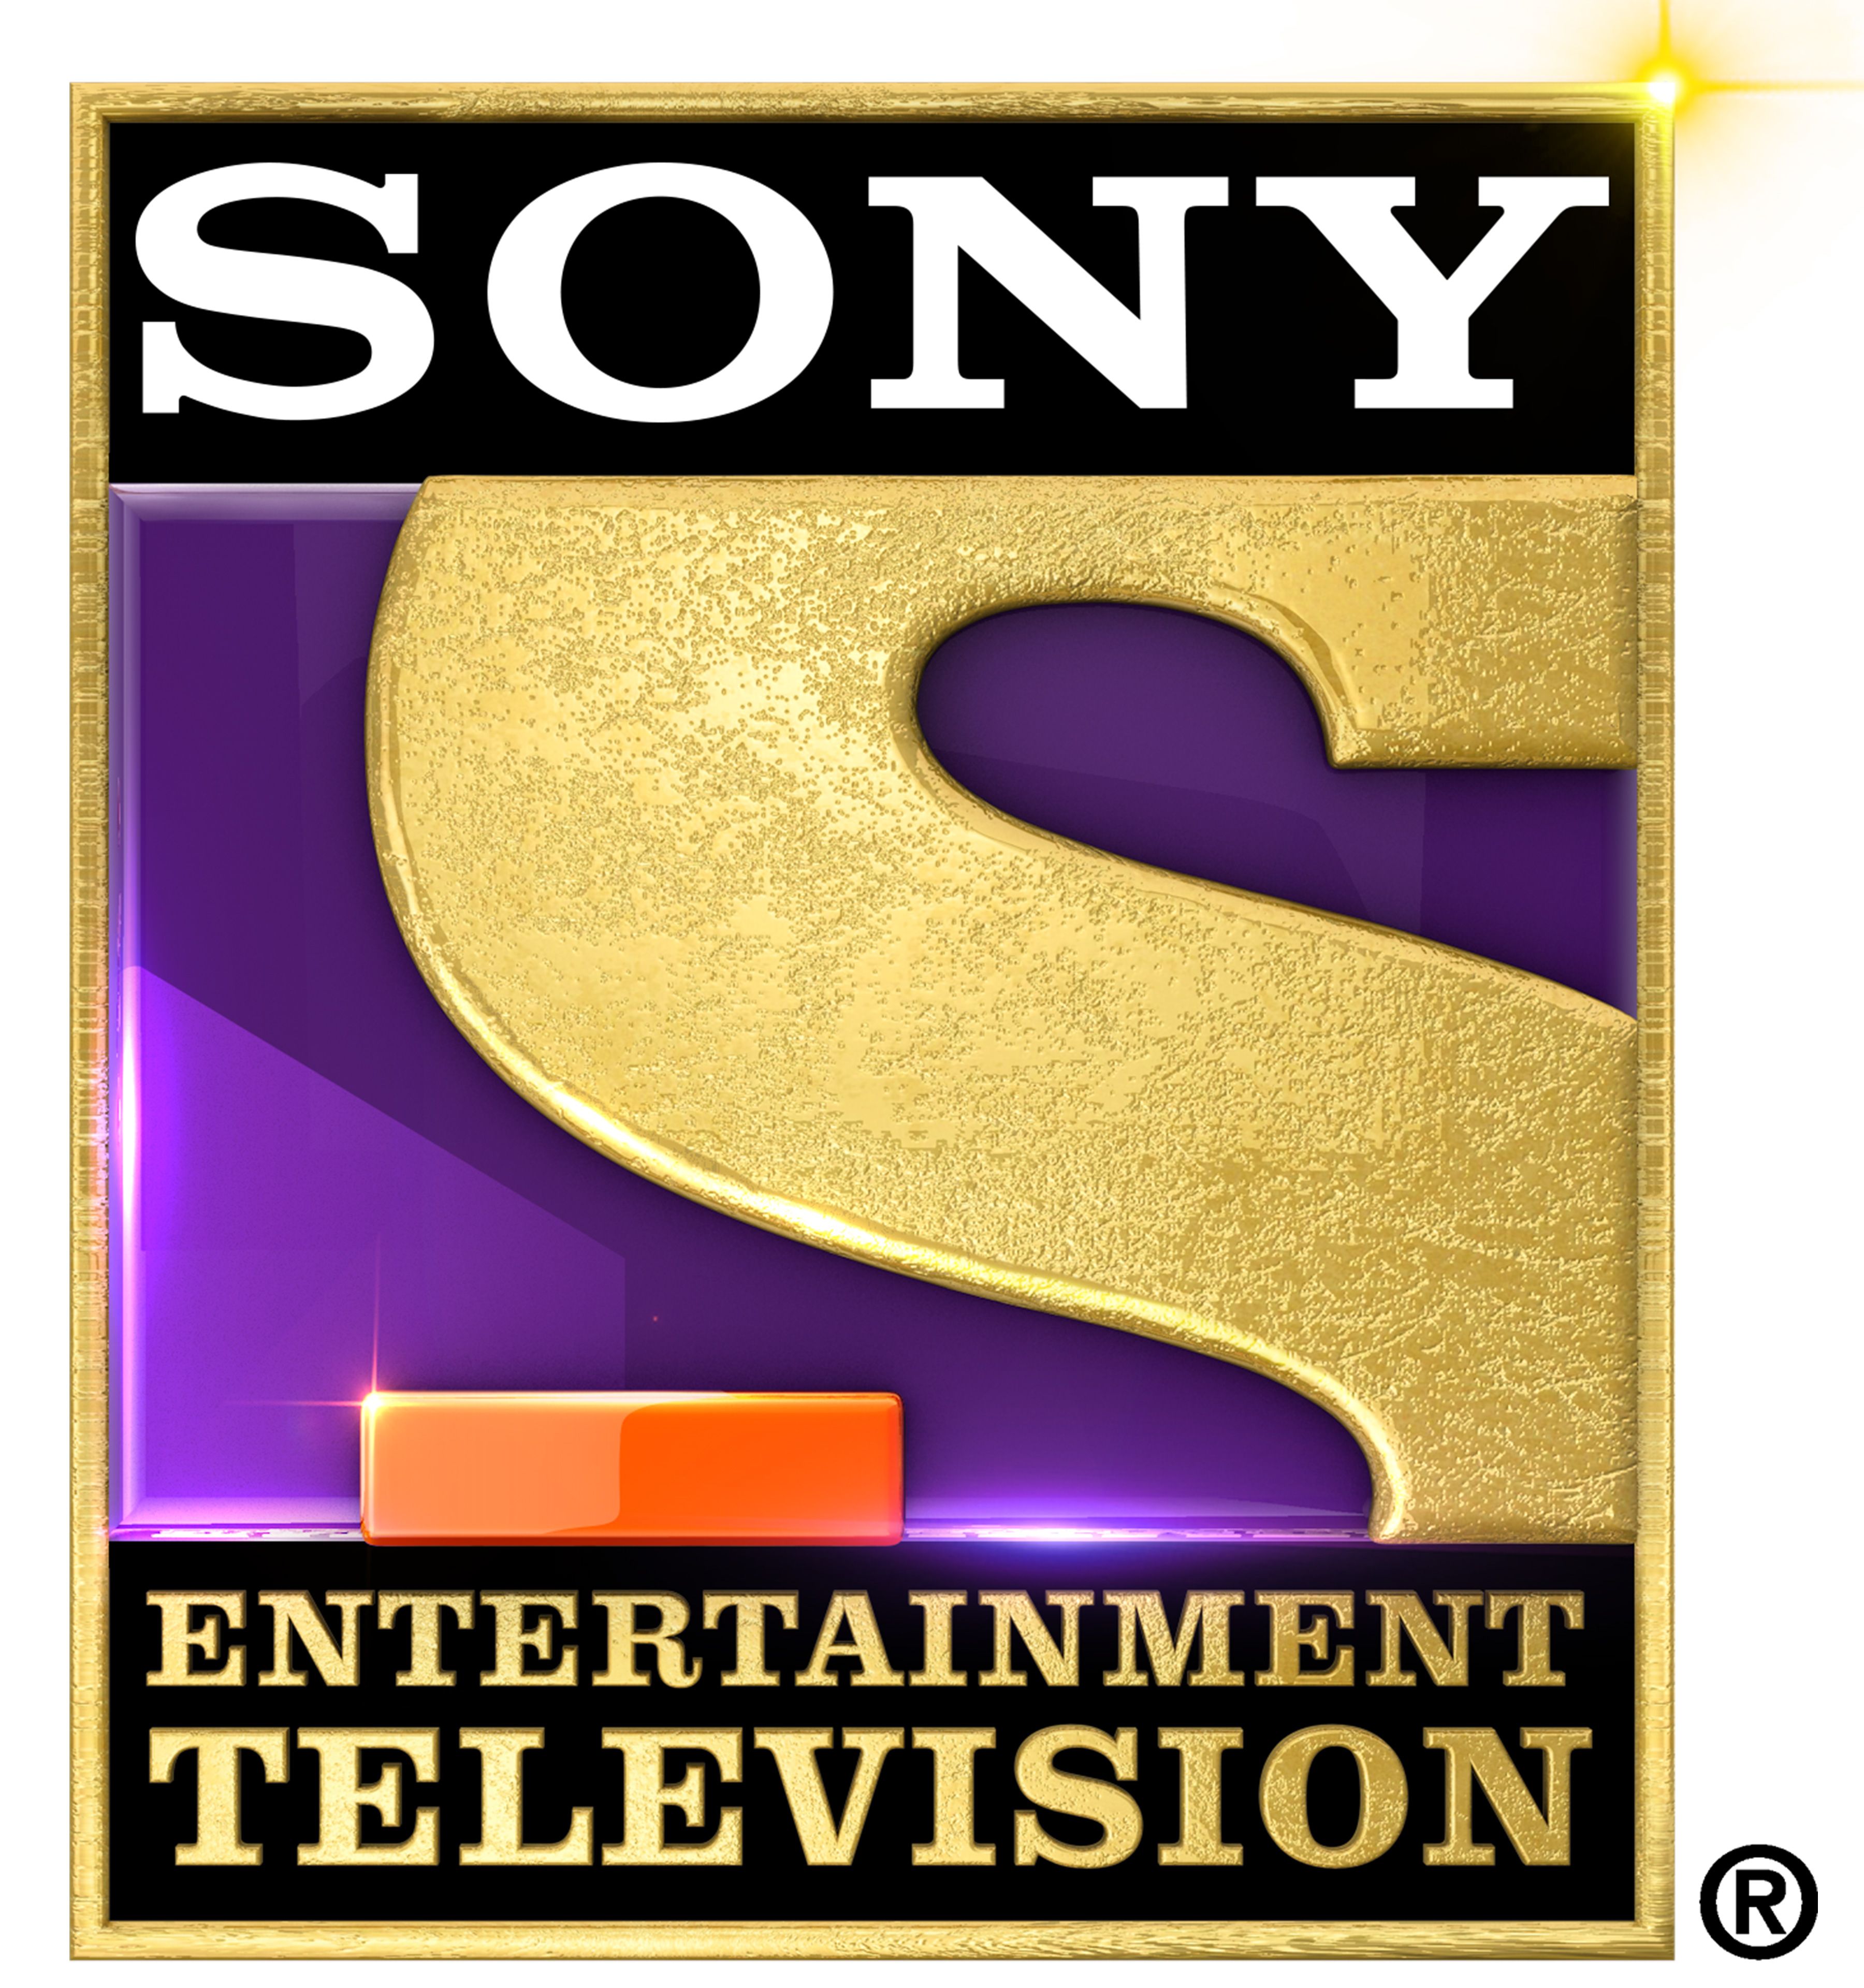 sony-entertainment-television-new-logo-view-and-download-hd-logo